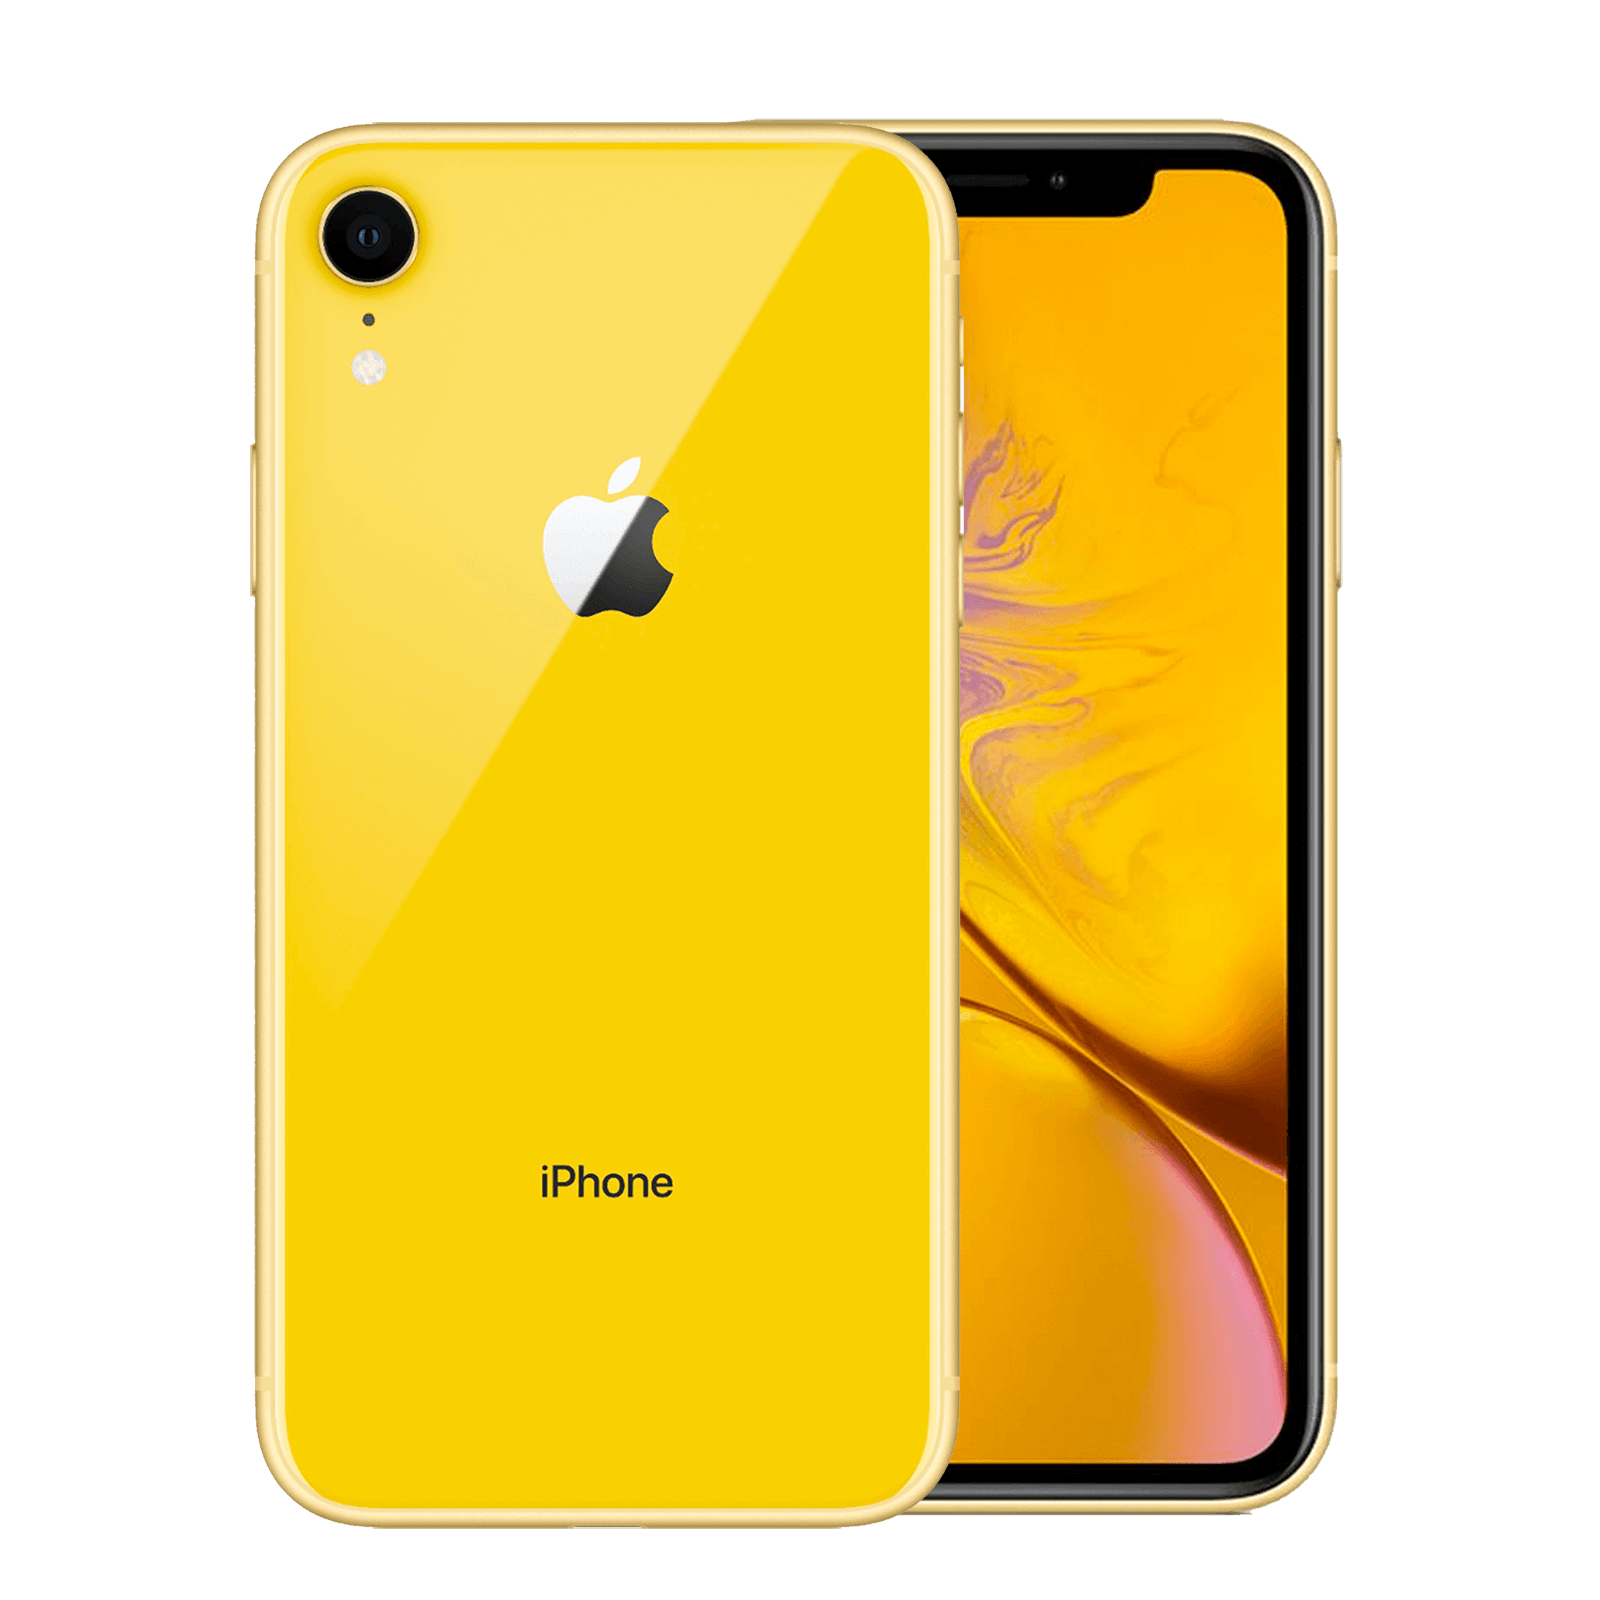 Apple iPhone XR 64GB Yellow Good - AT&T